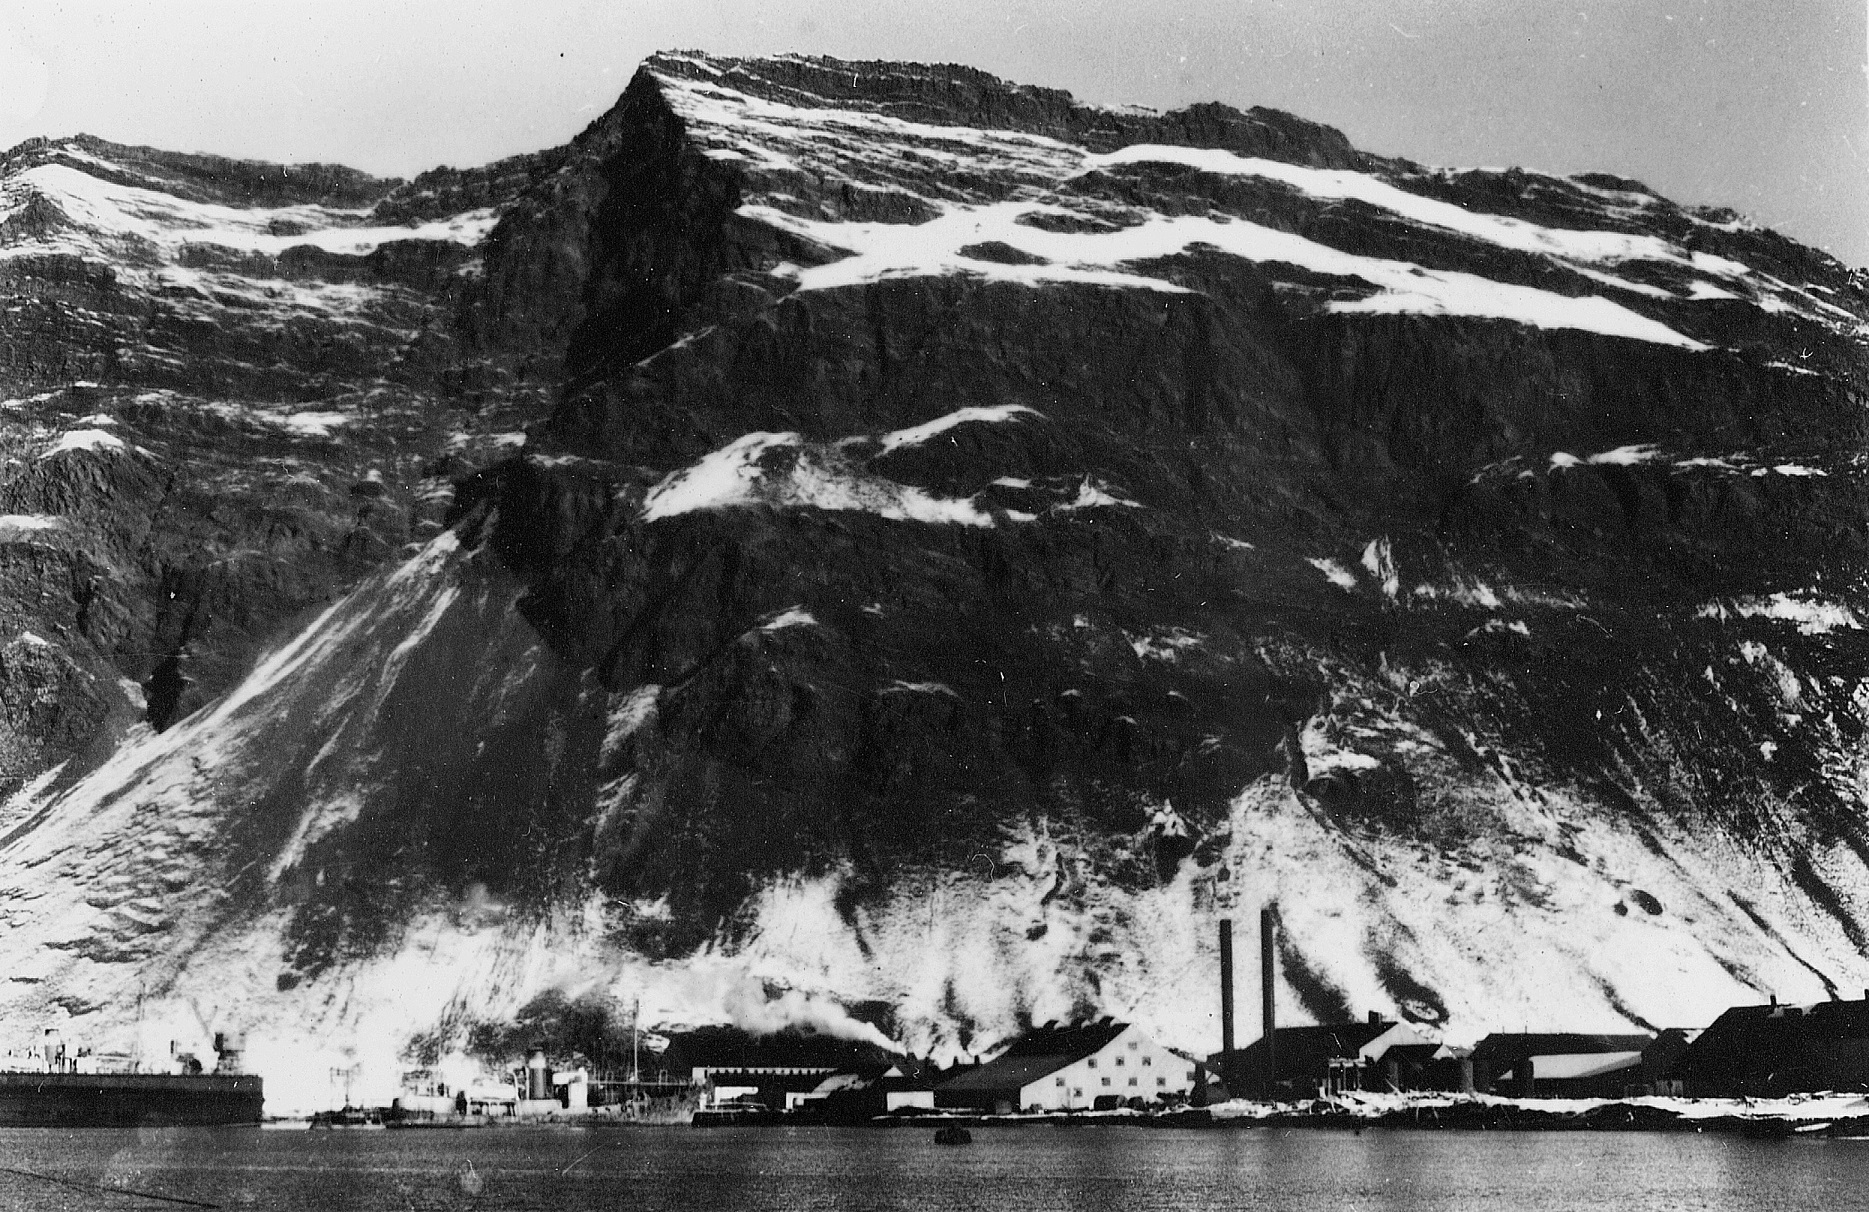 Black and white archive photo showing ice covered hills